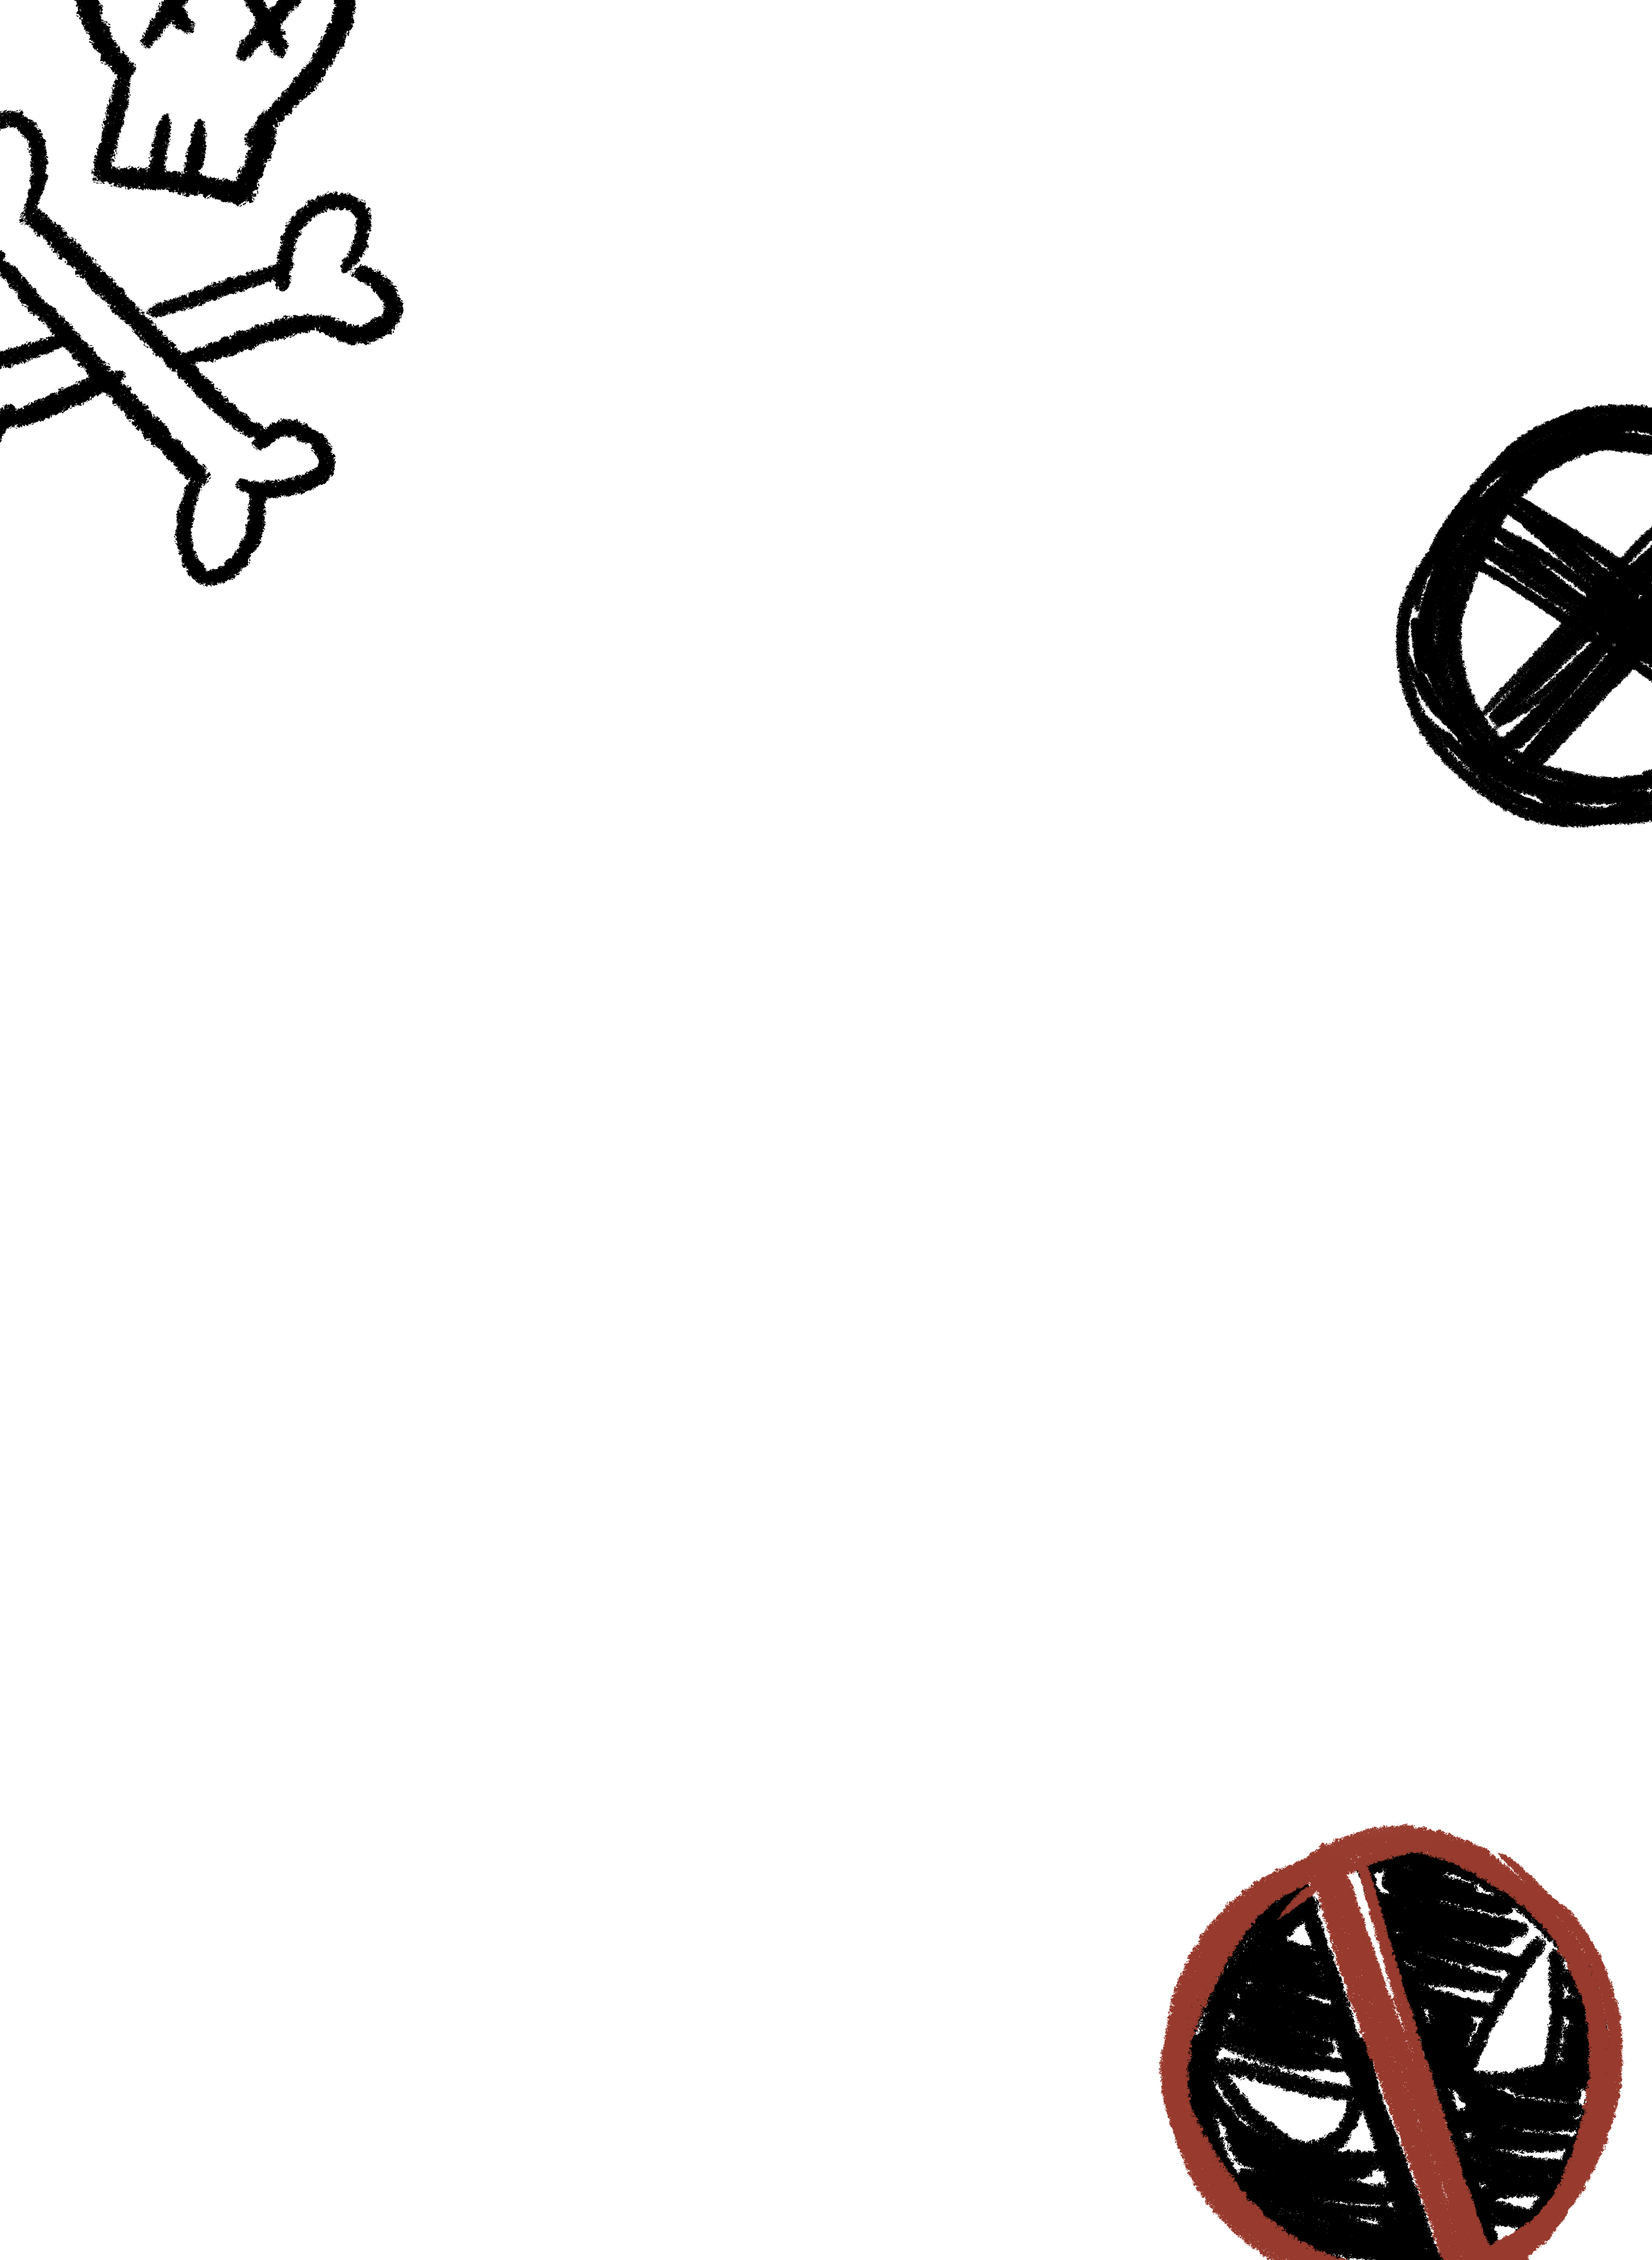 White background with Deadpool and Wolverine logos